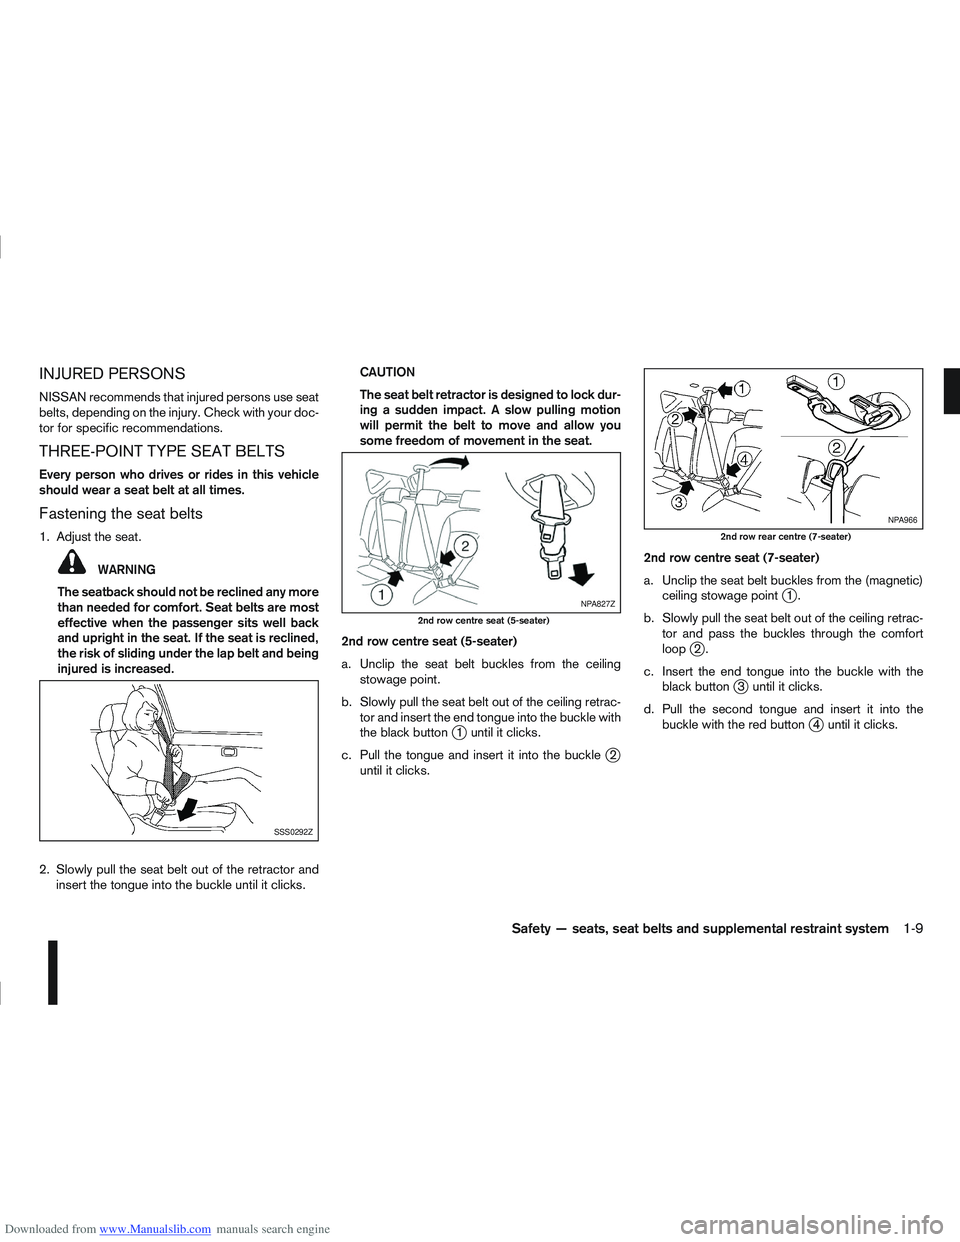 NISSAN QASHQAI 2006  Owners Manual Downloaded from www.Manualslib.com manuals search engine INJURED PERSONS
NISSAN recommends that injured persons use seat
belts, depending on the injury. Check with your doc-
tor for specific recommend